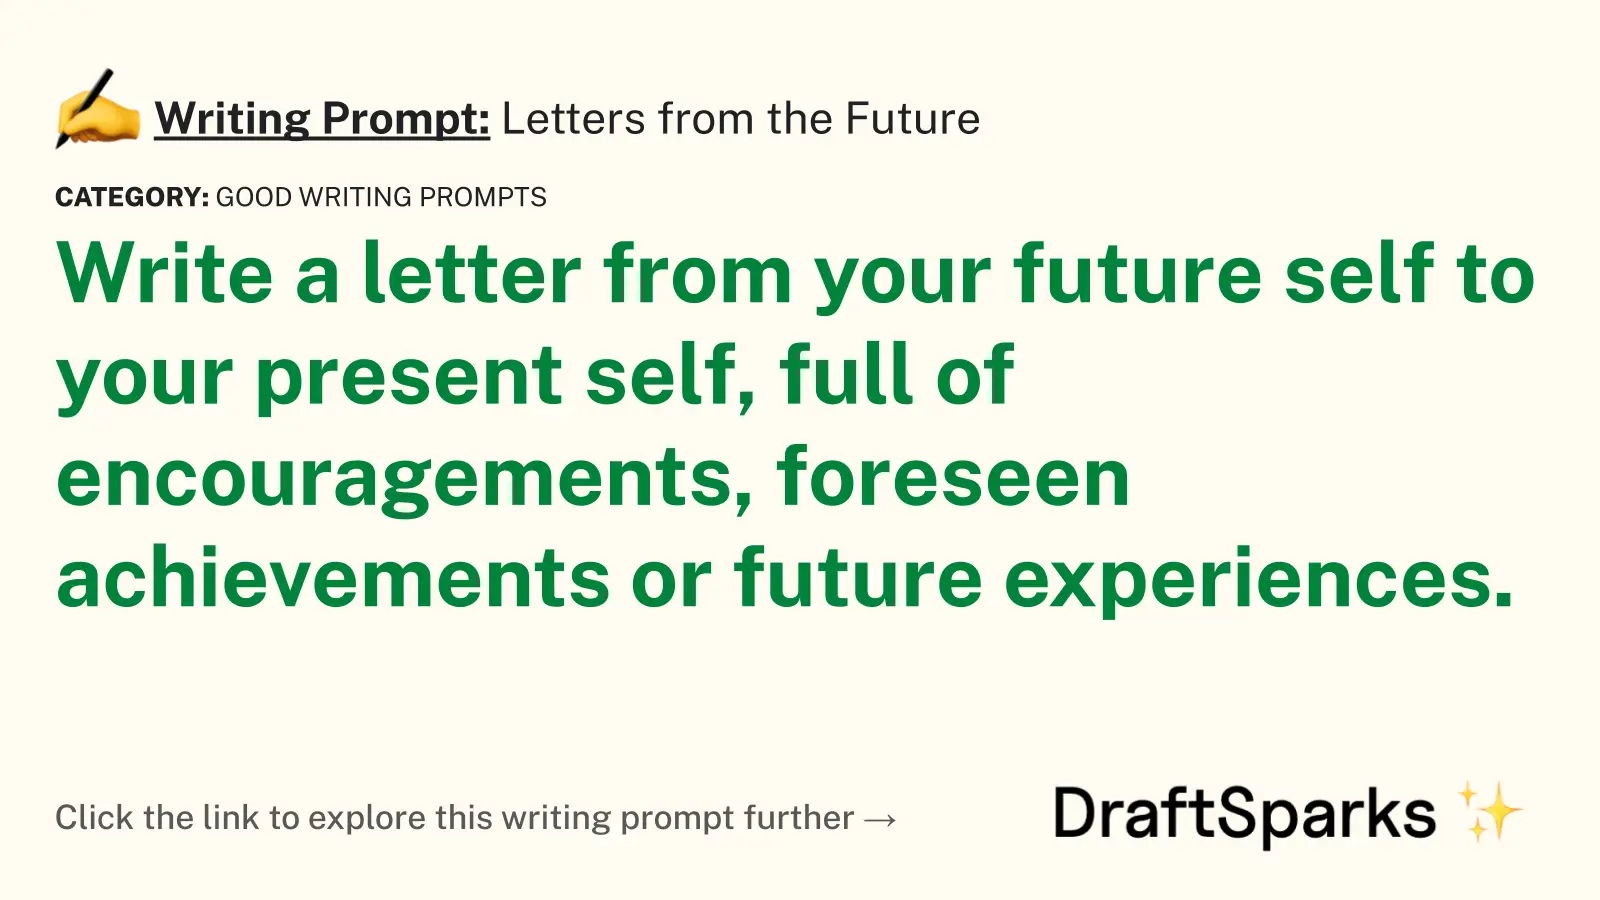 Letters from the Future